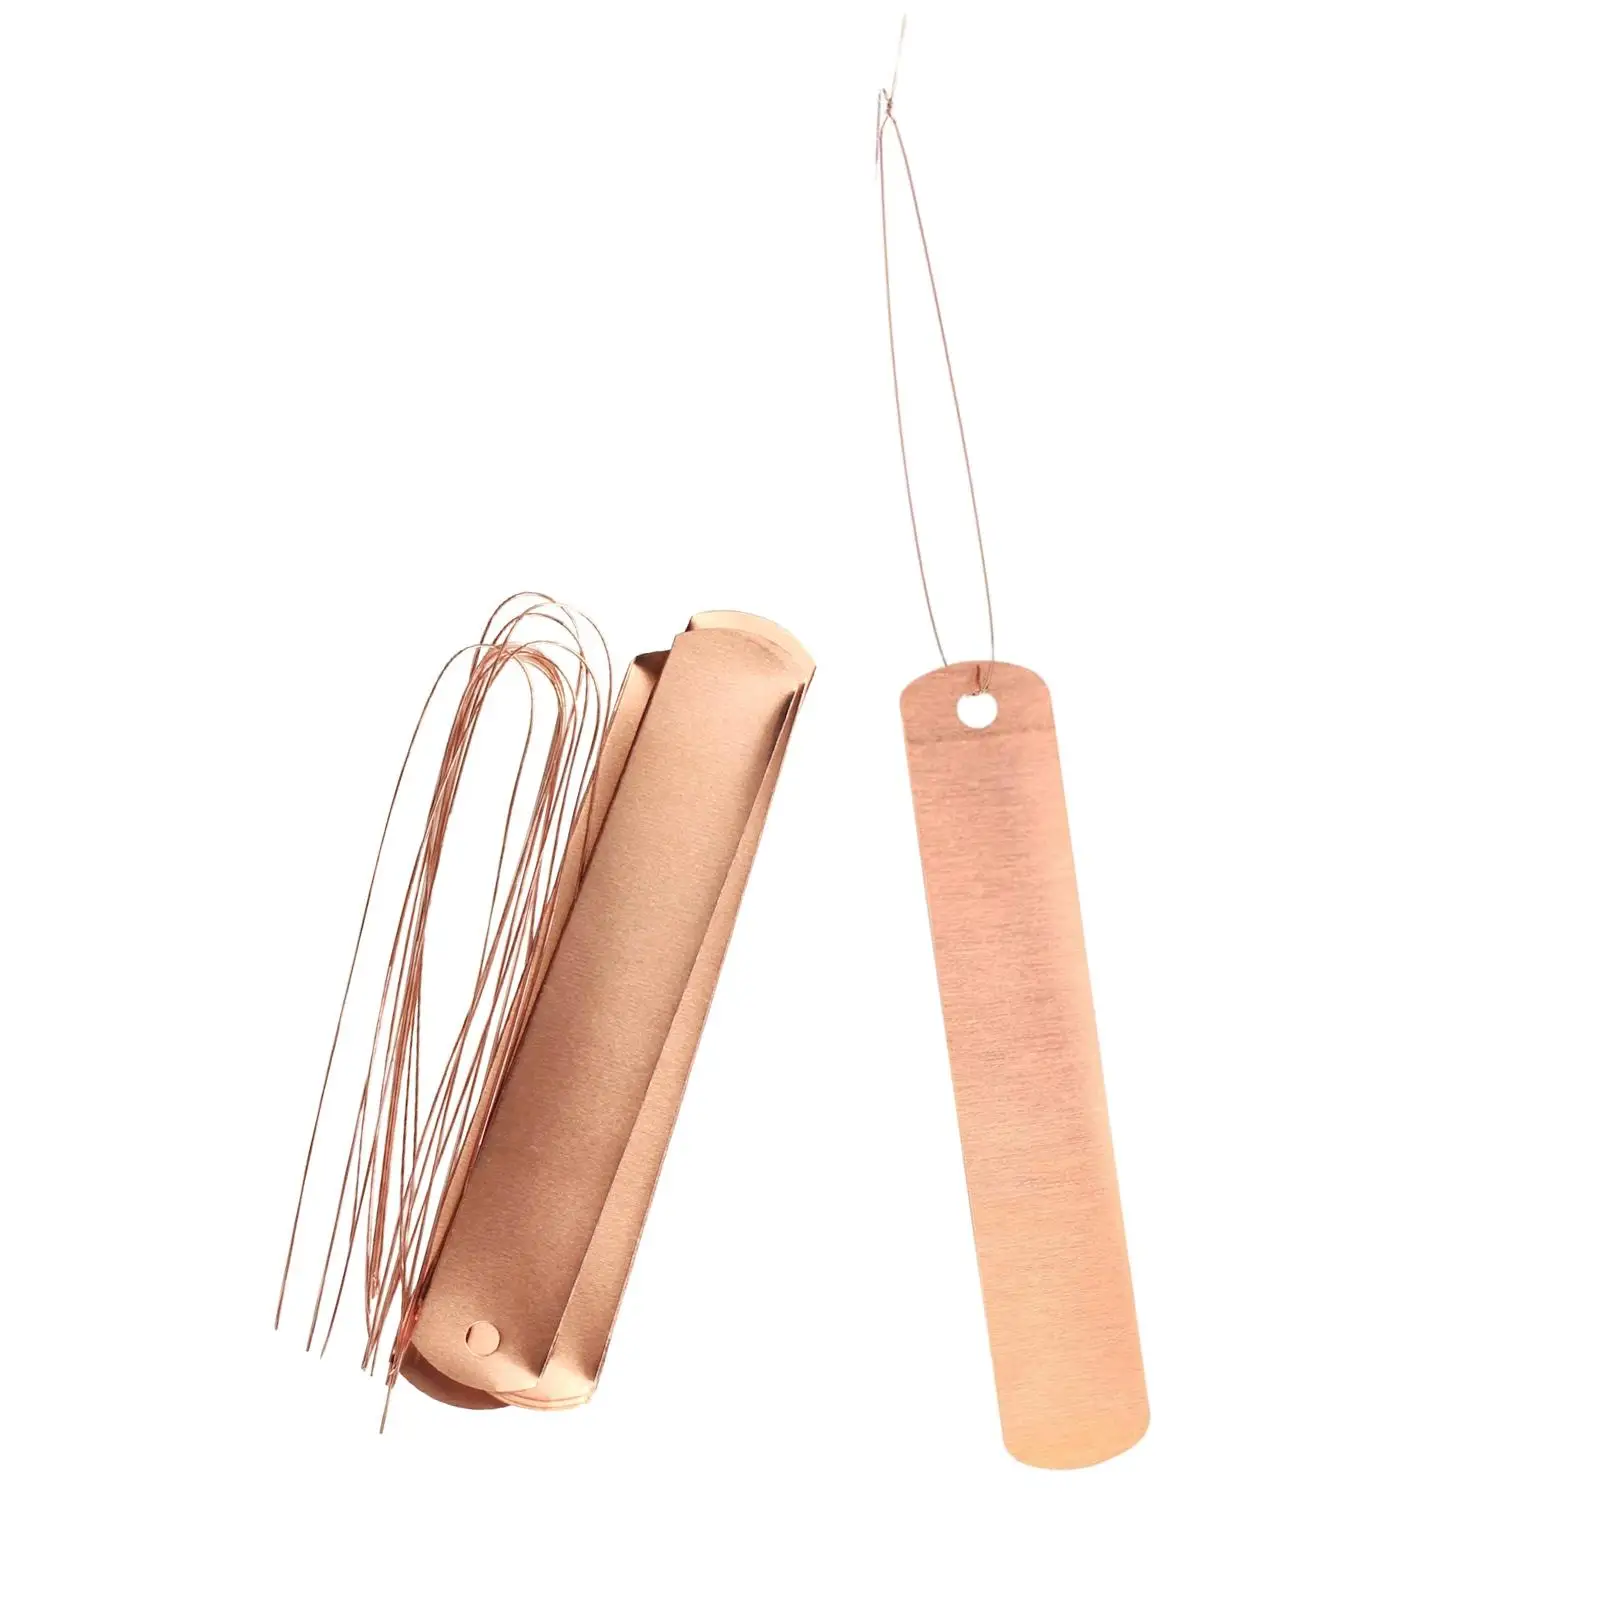 Copper  Labels Long Reusable Garden Tags Planting Marker with Ties